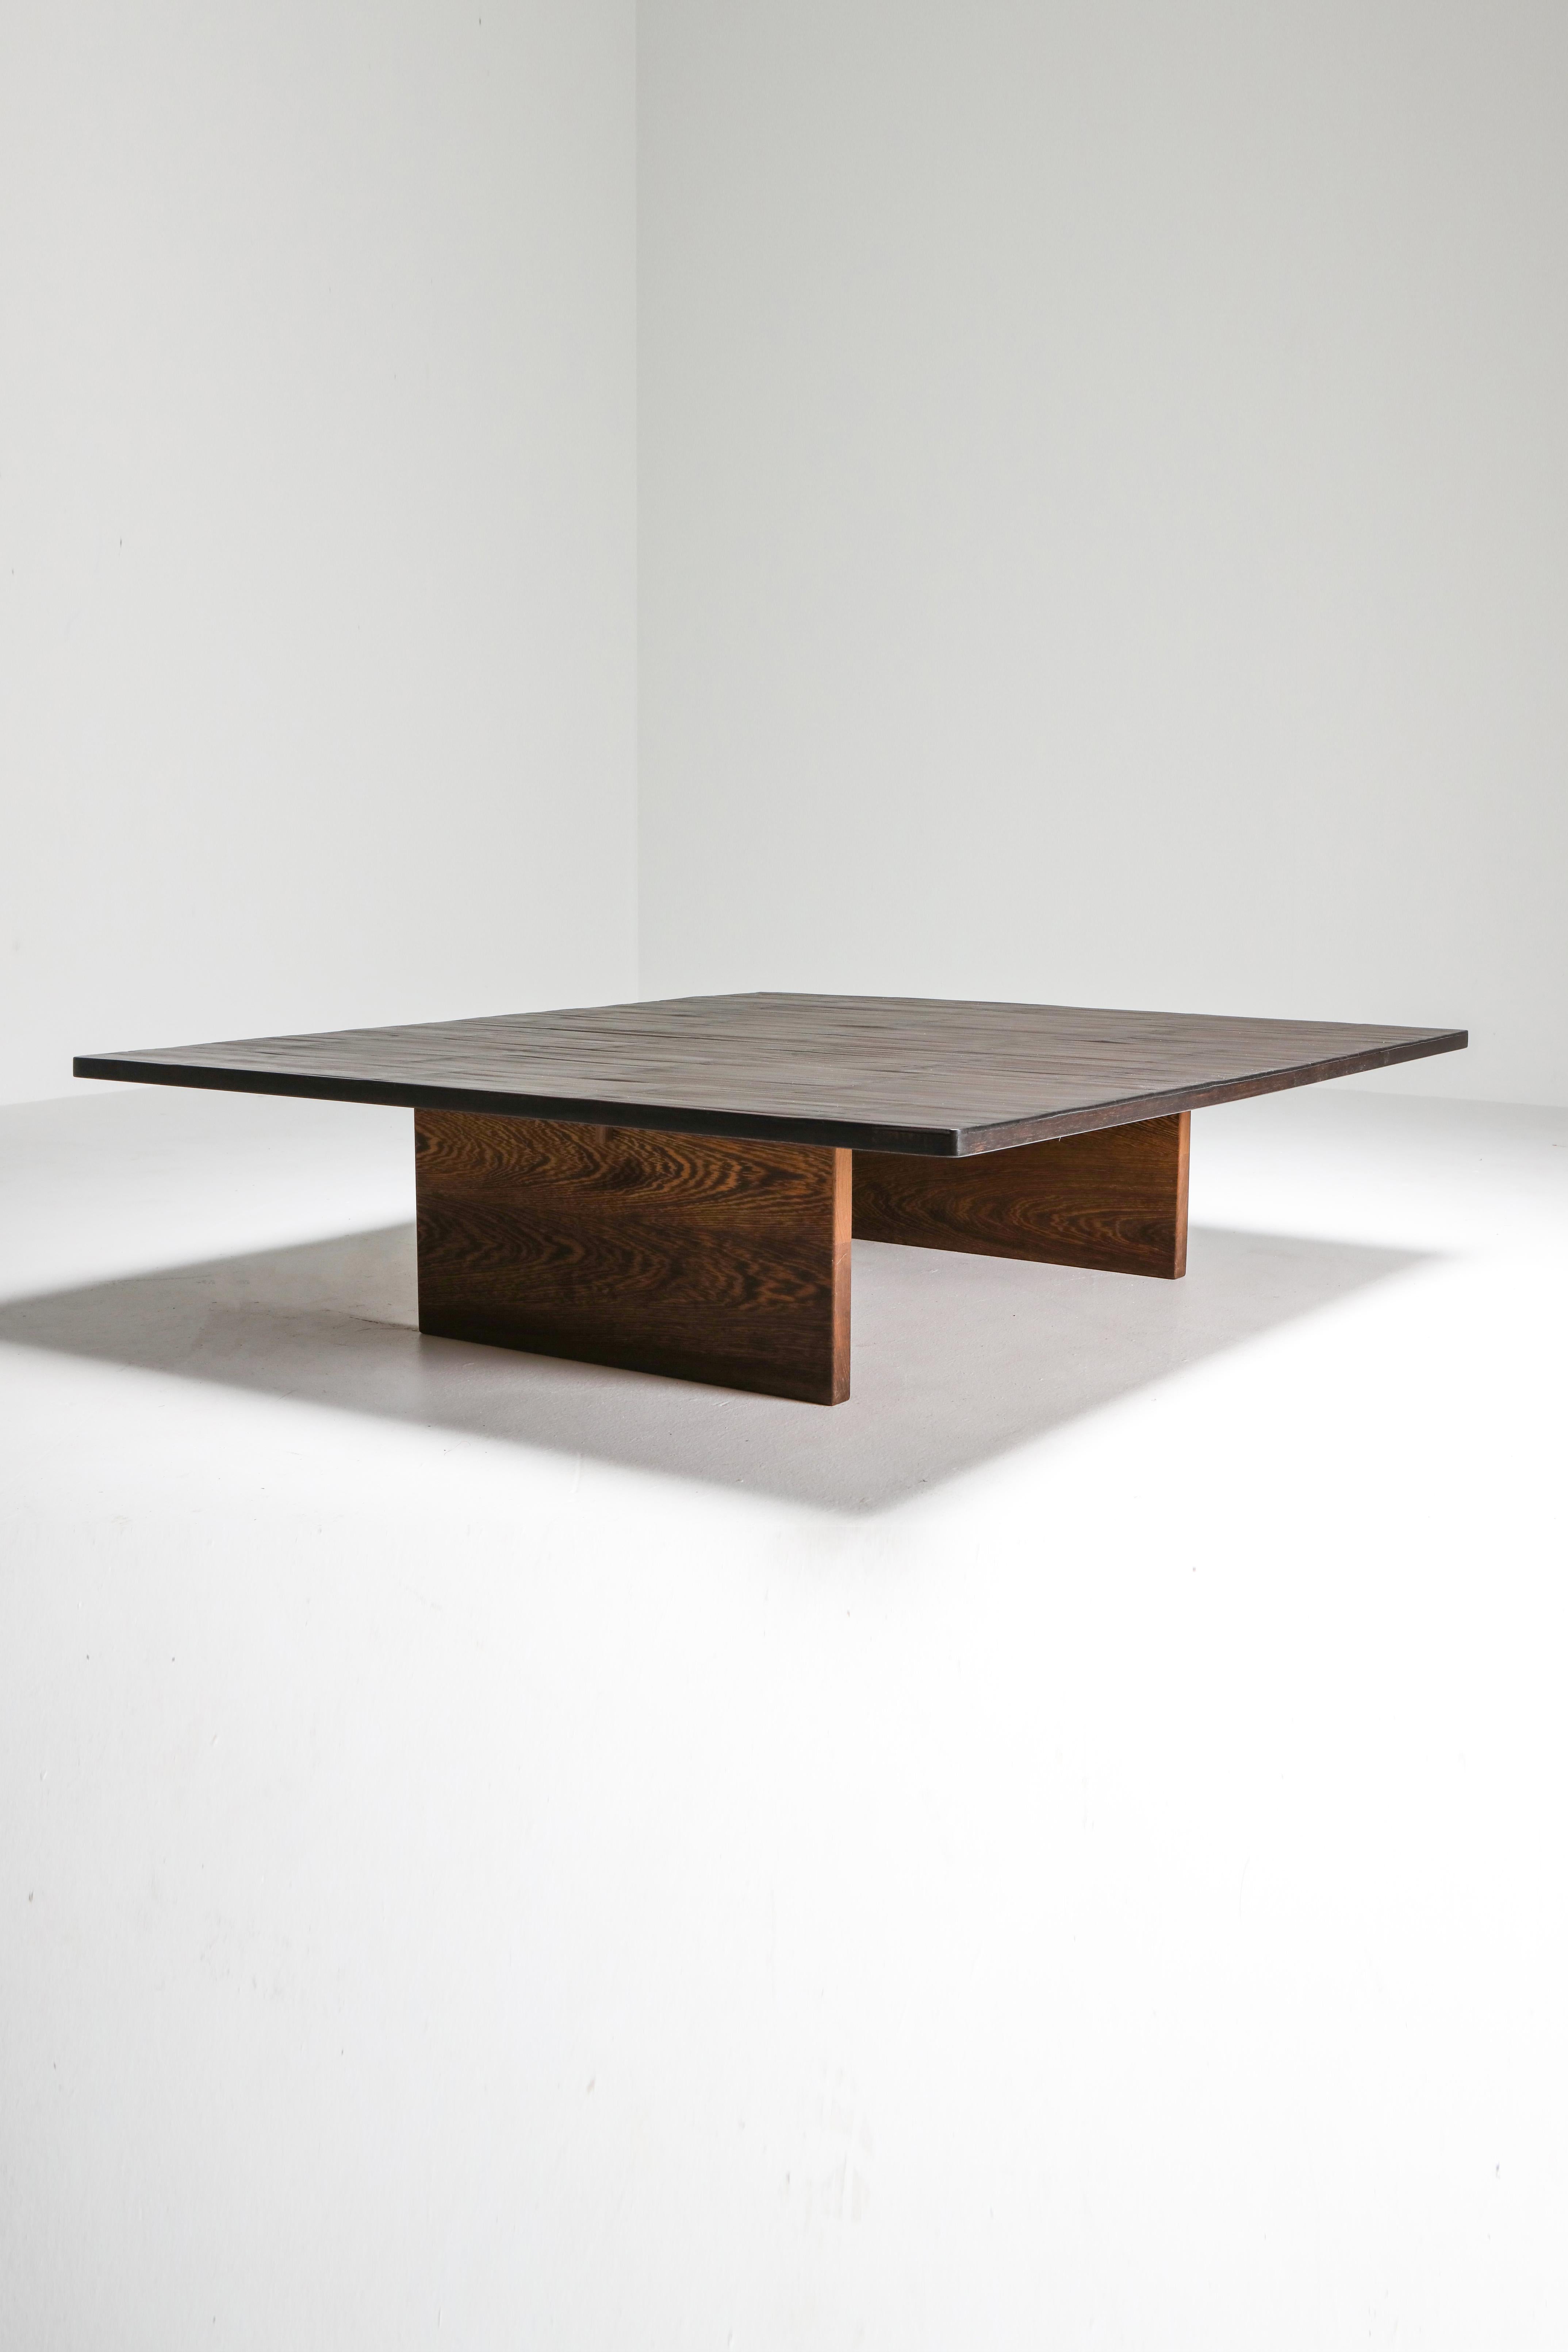 20th Century Axel Vervoordt Wenge and Bamboo Coffee Table, 1980s